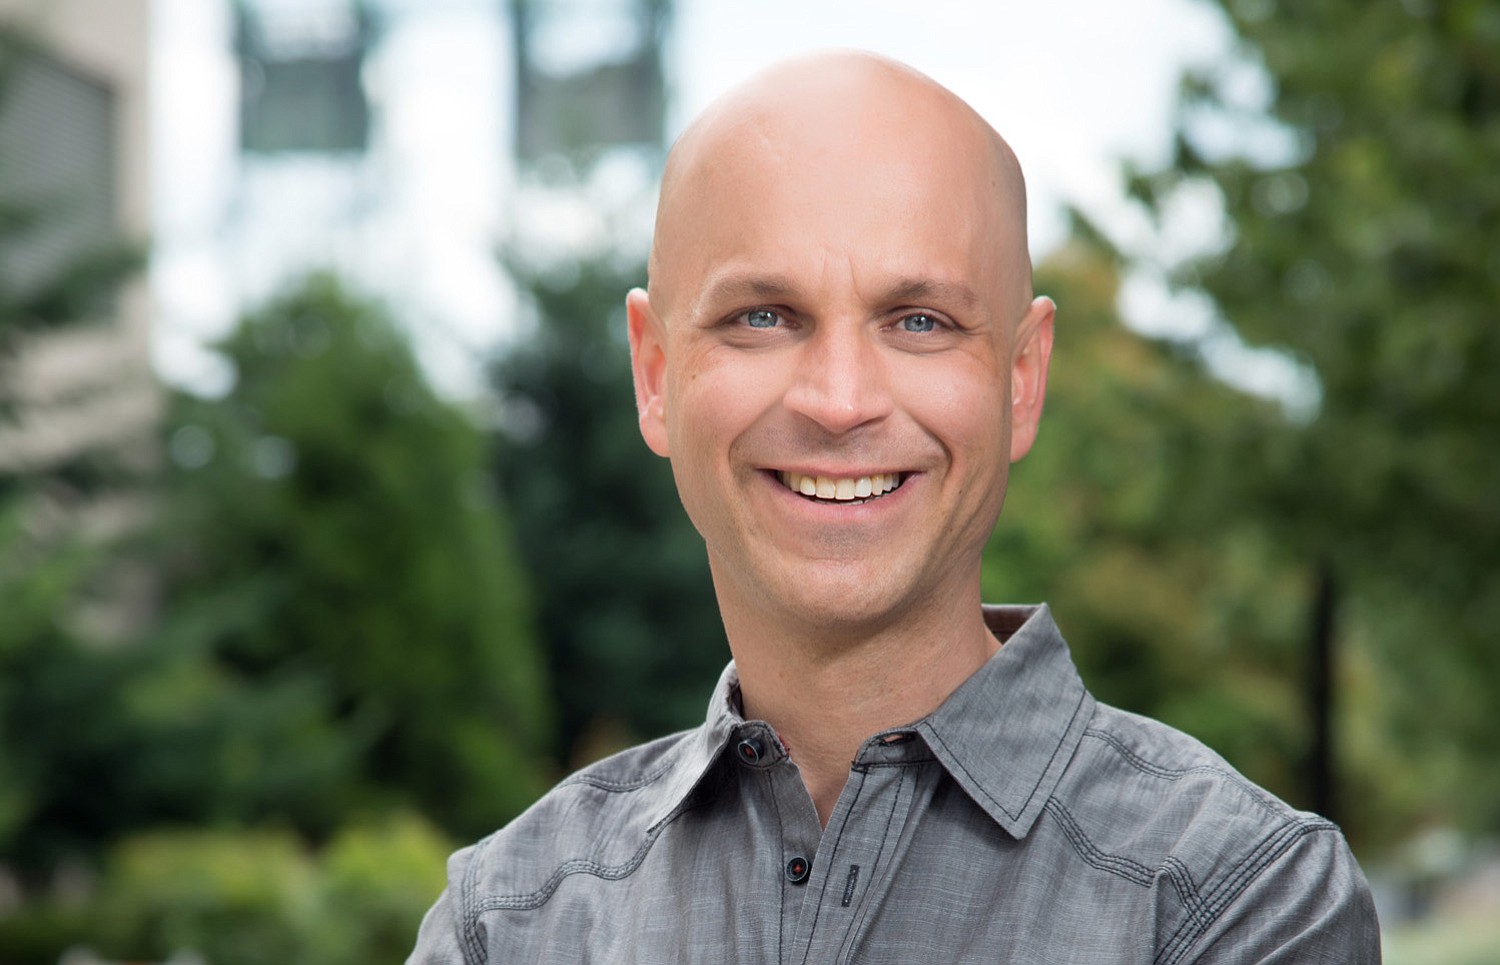 Vancouver City Council candidate Ty Stober plans to challenge current Councilor Bill Turlay.